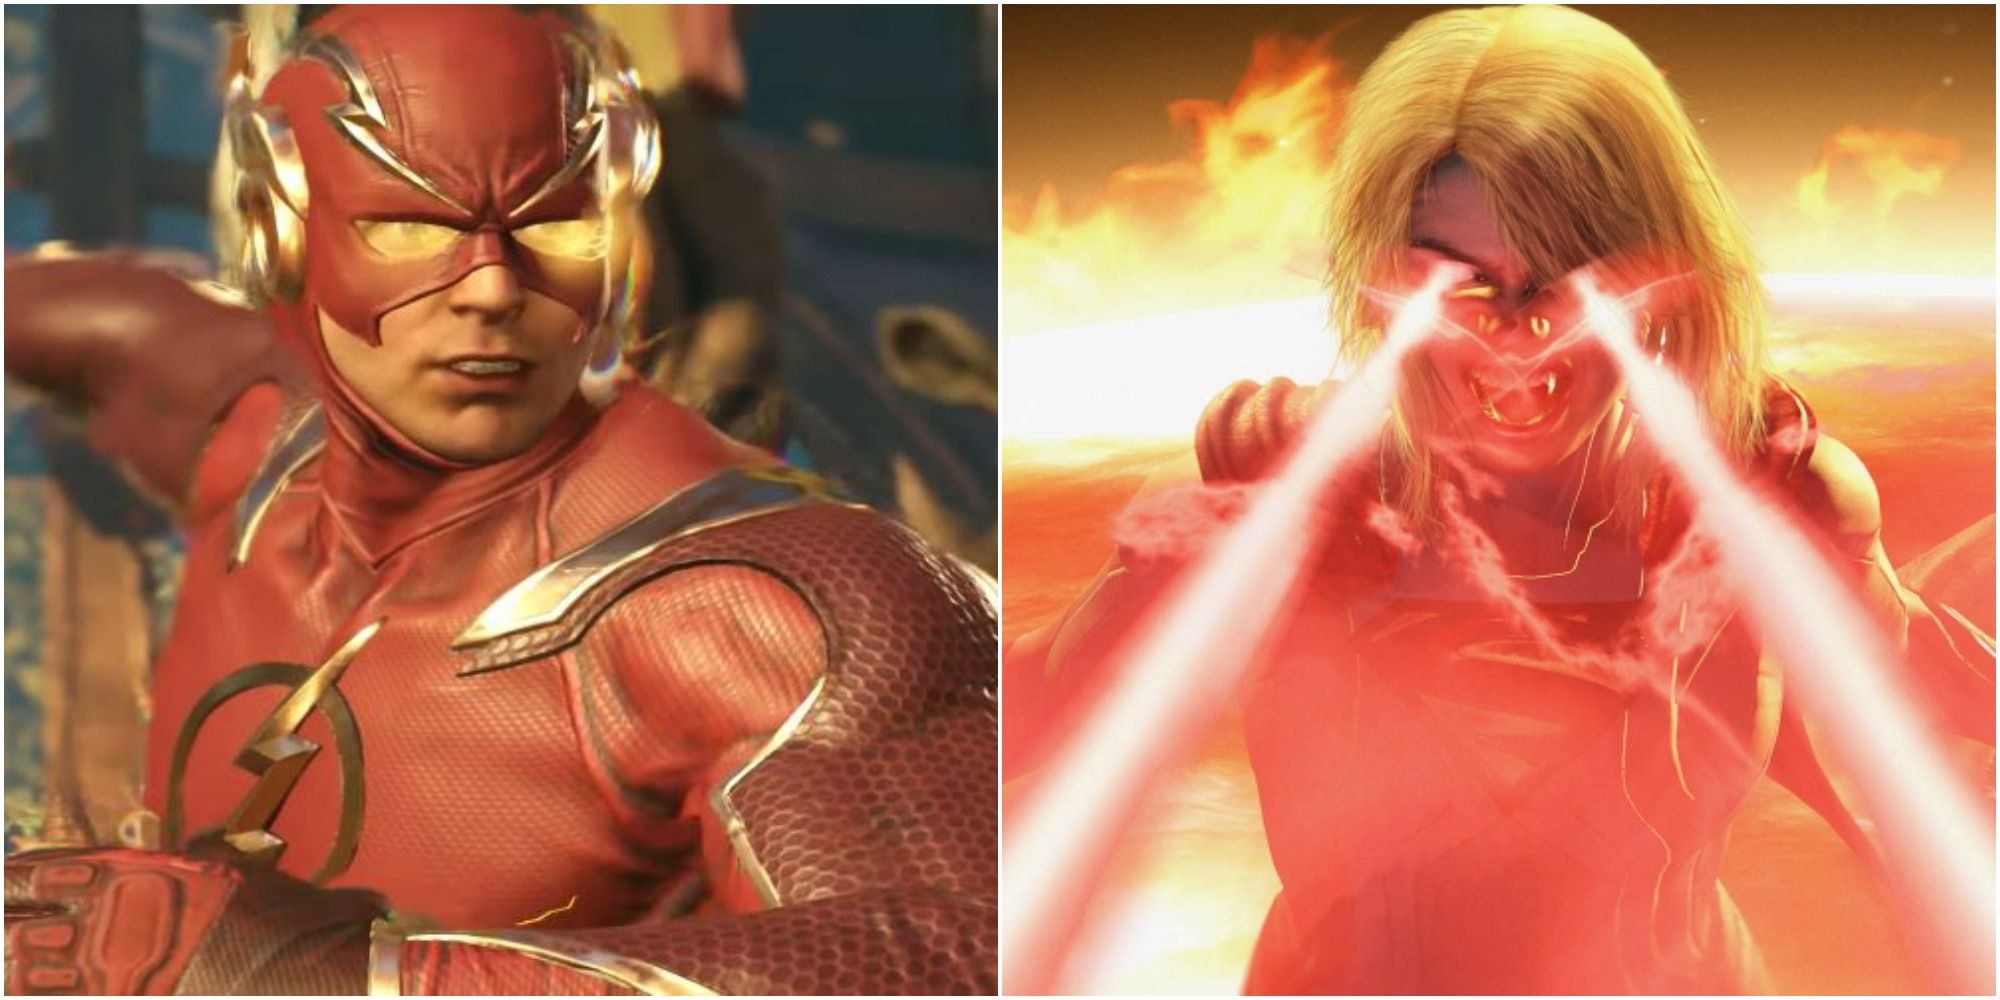 A split image of The Flash and Supergirl.